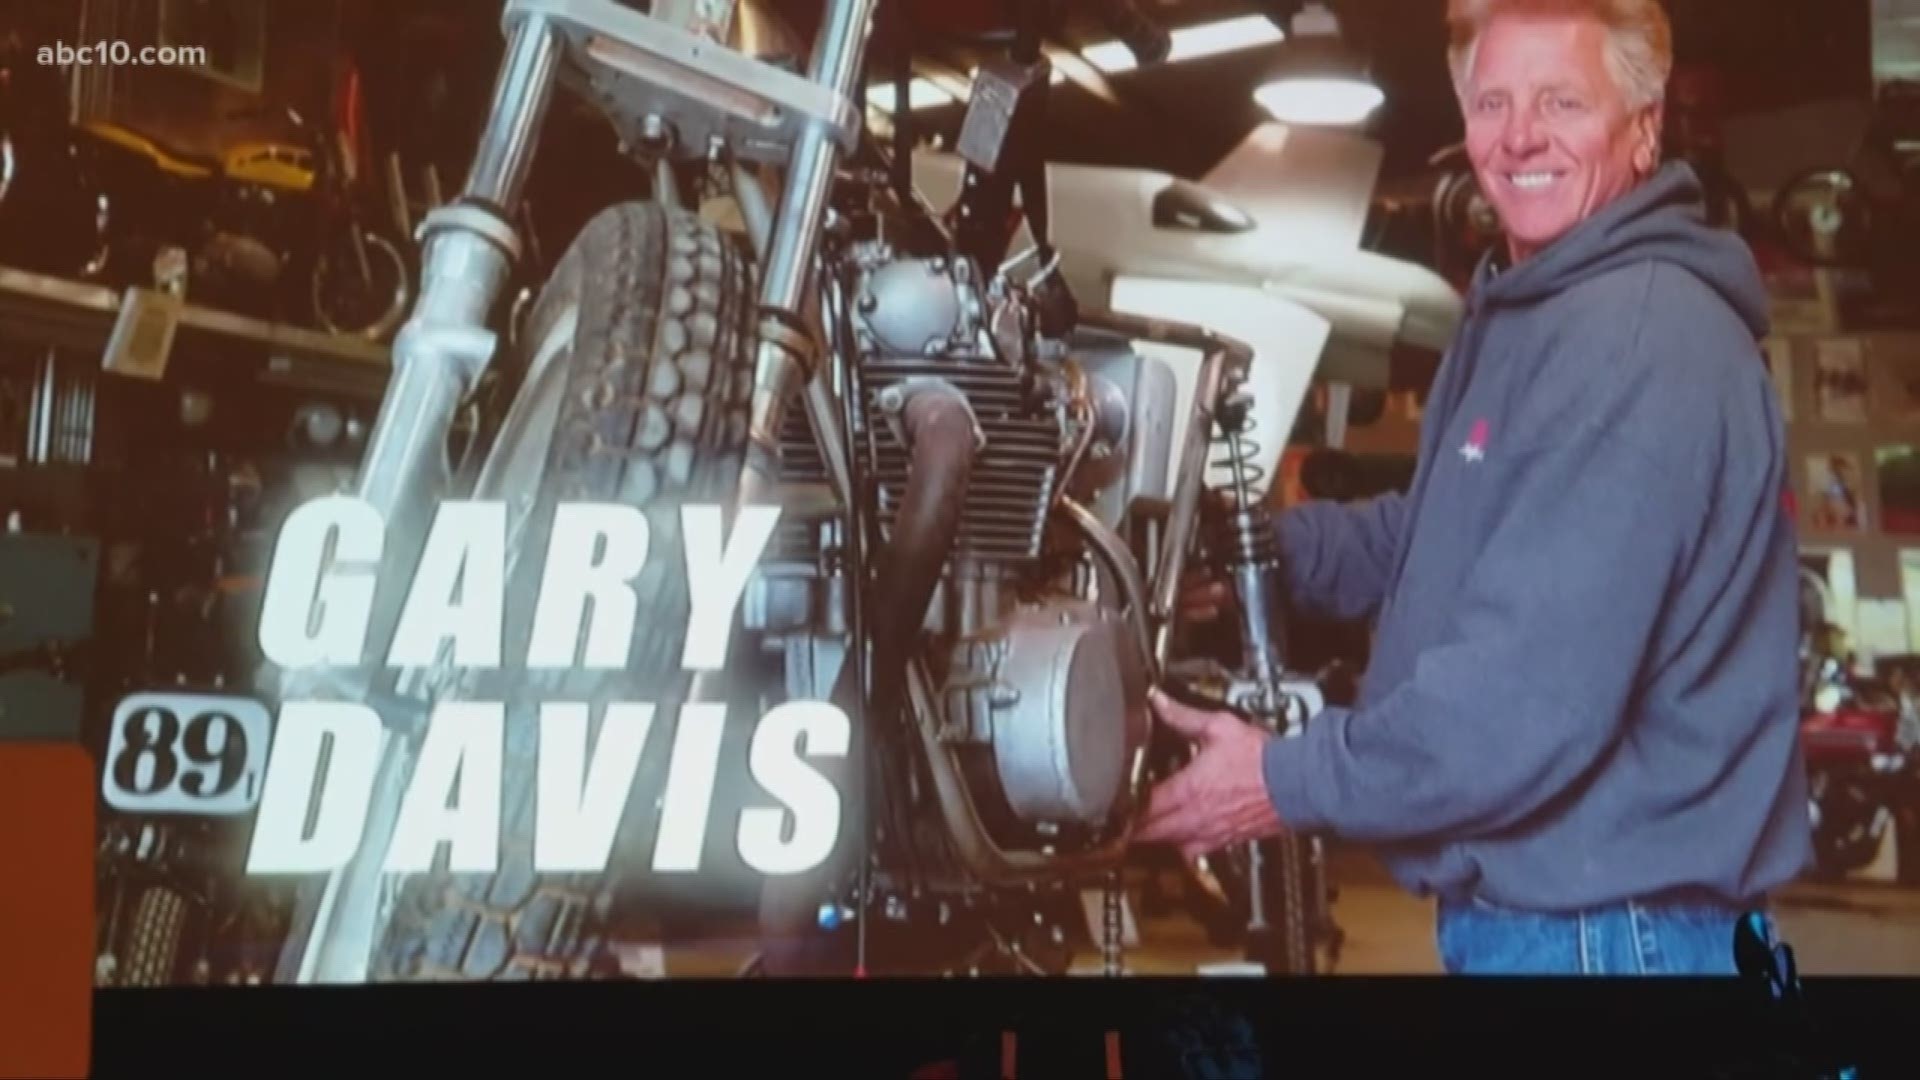 Vehicular stunt coordinator Gary Davis was recently inducted into the Motorcycle Hall of Fame.